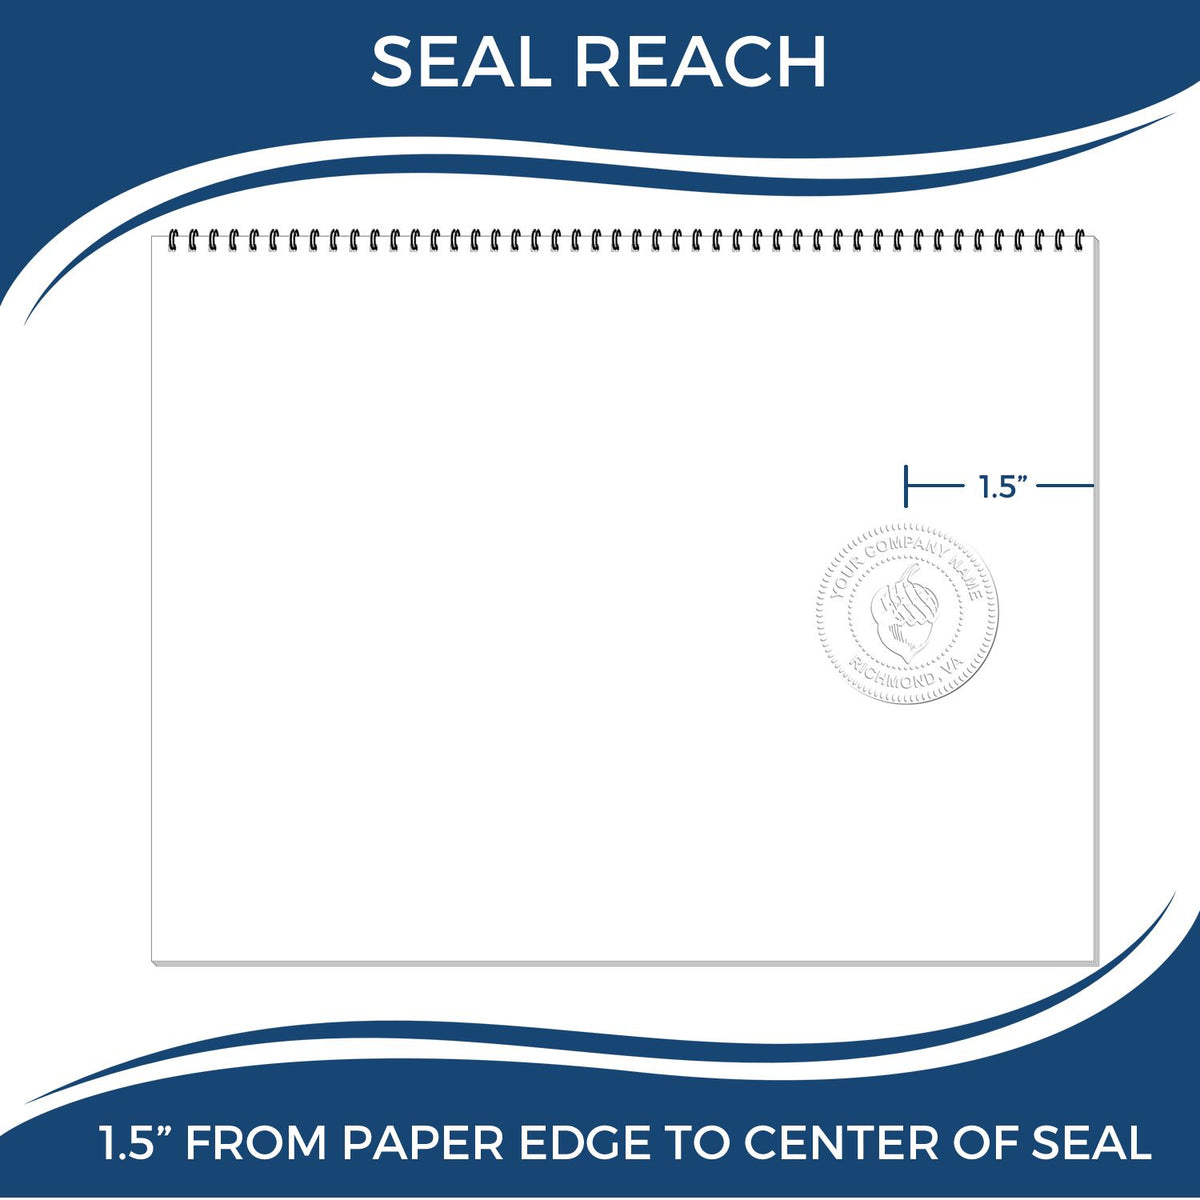 An infographic showing the seal reach which is represented by a ruler and a miniature seal image of the Hybrid Arizona Landscape Architect Seal